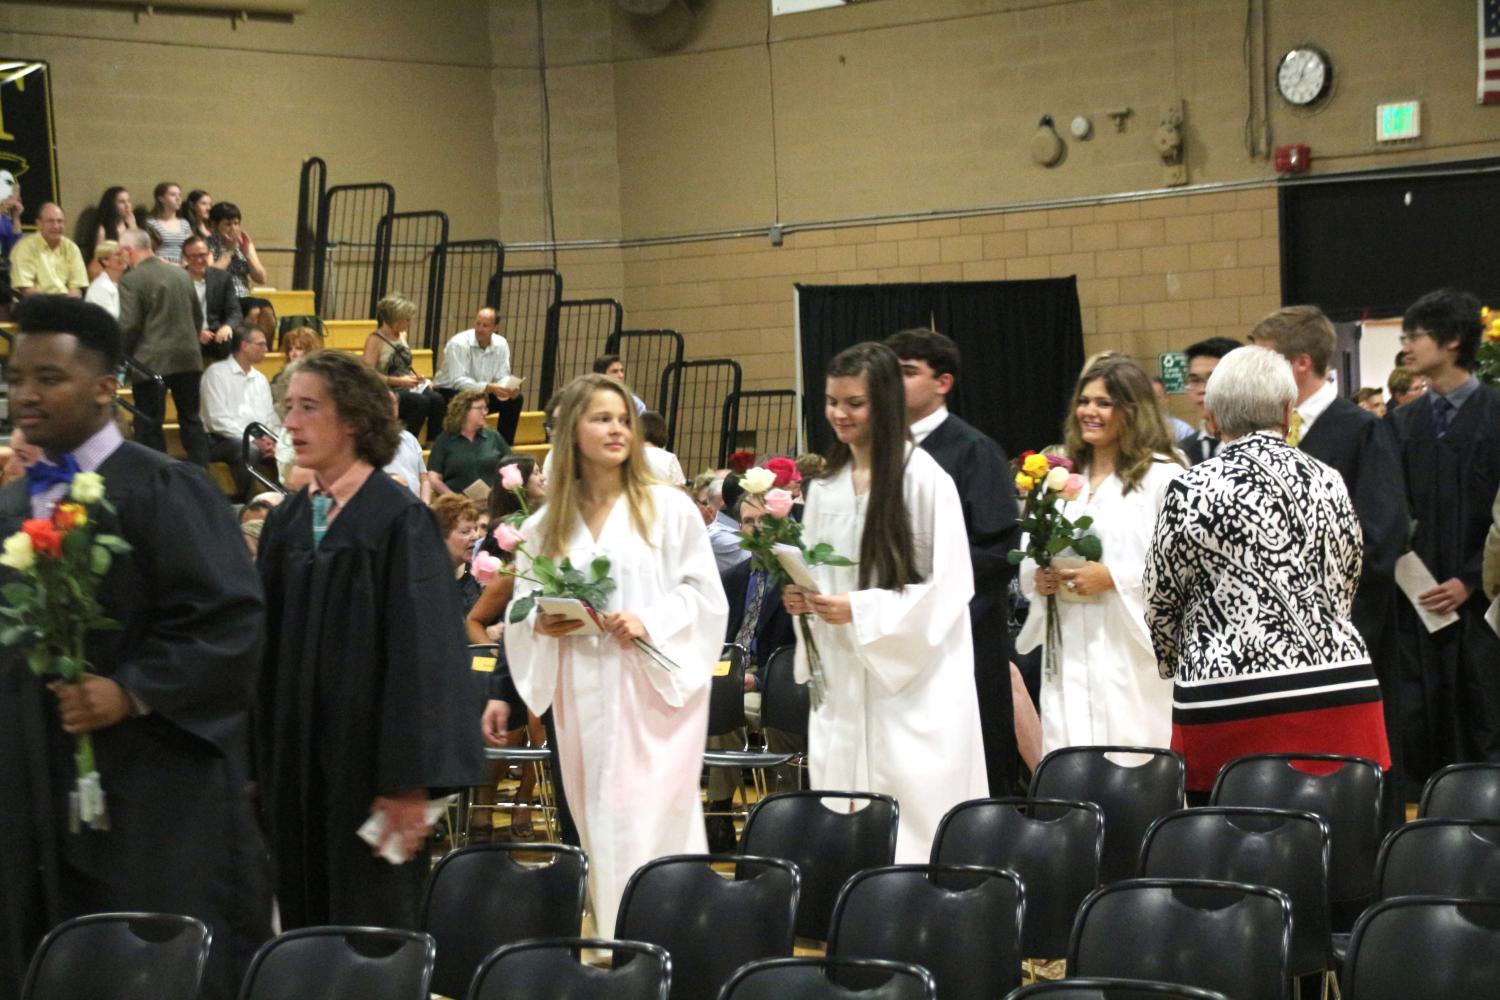 Members of the class of 2016 process into the Upper Gym for their Baccalaureate Mass. This year, the Mass is being held at Saint Margaret Church instead of at JC. 